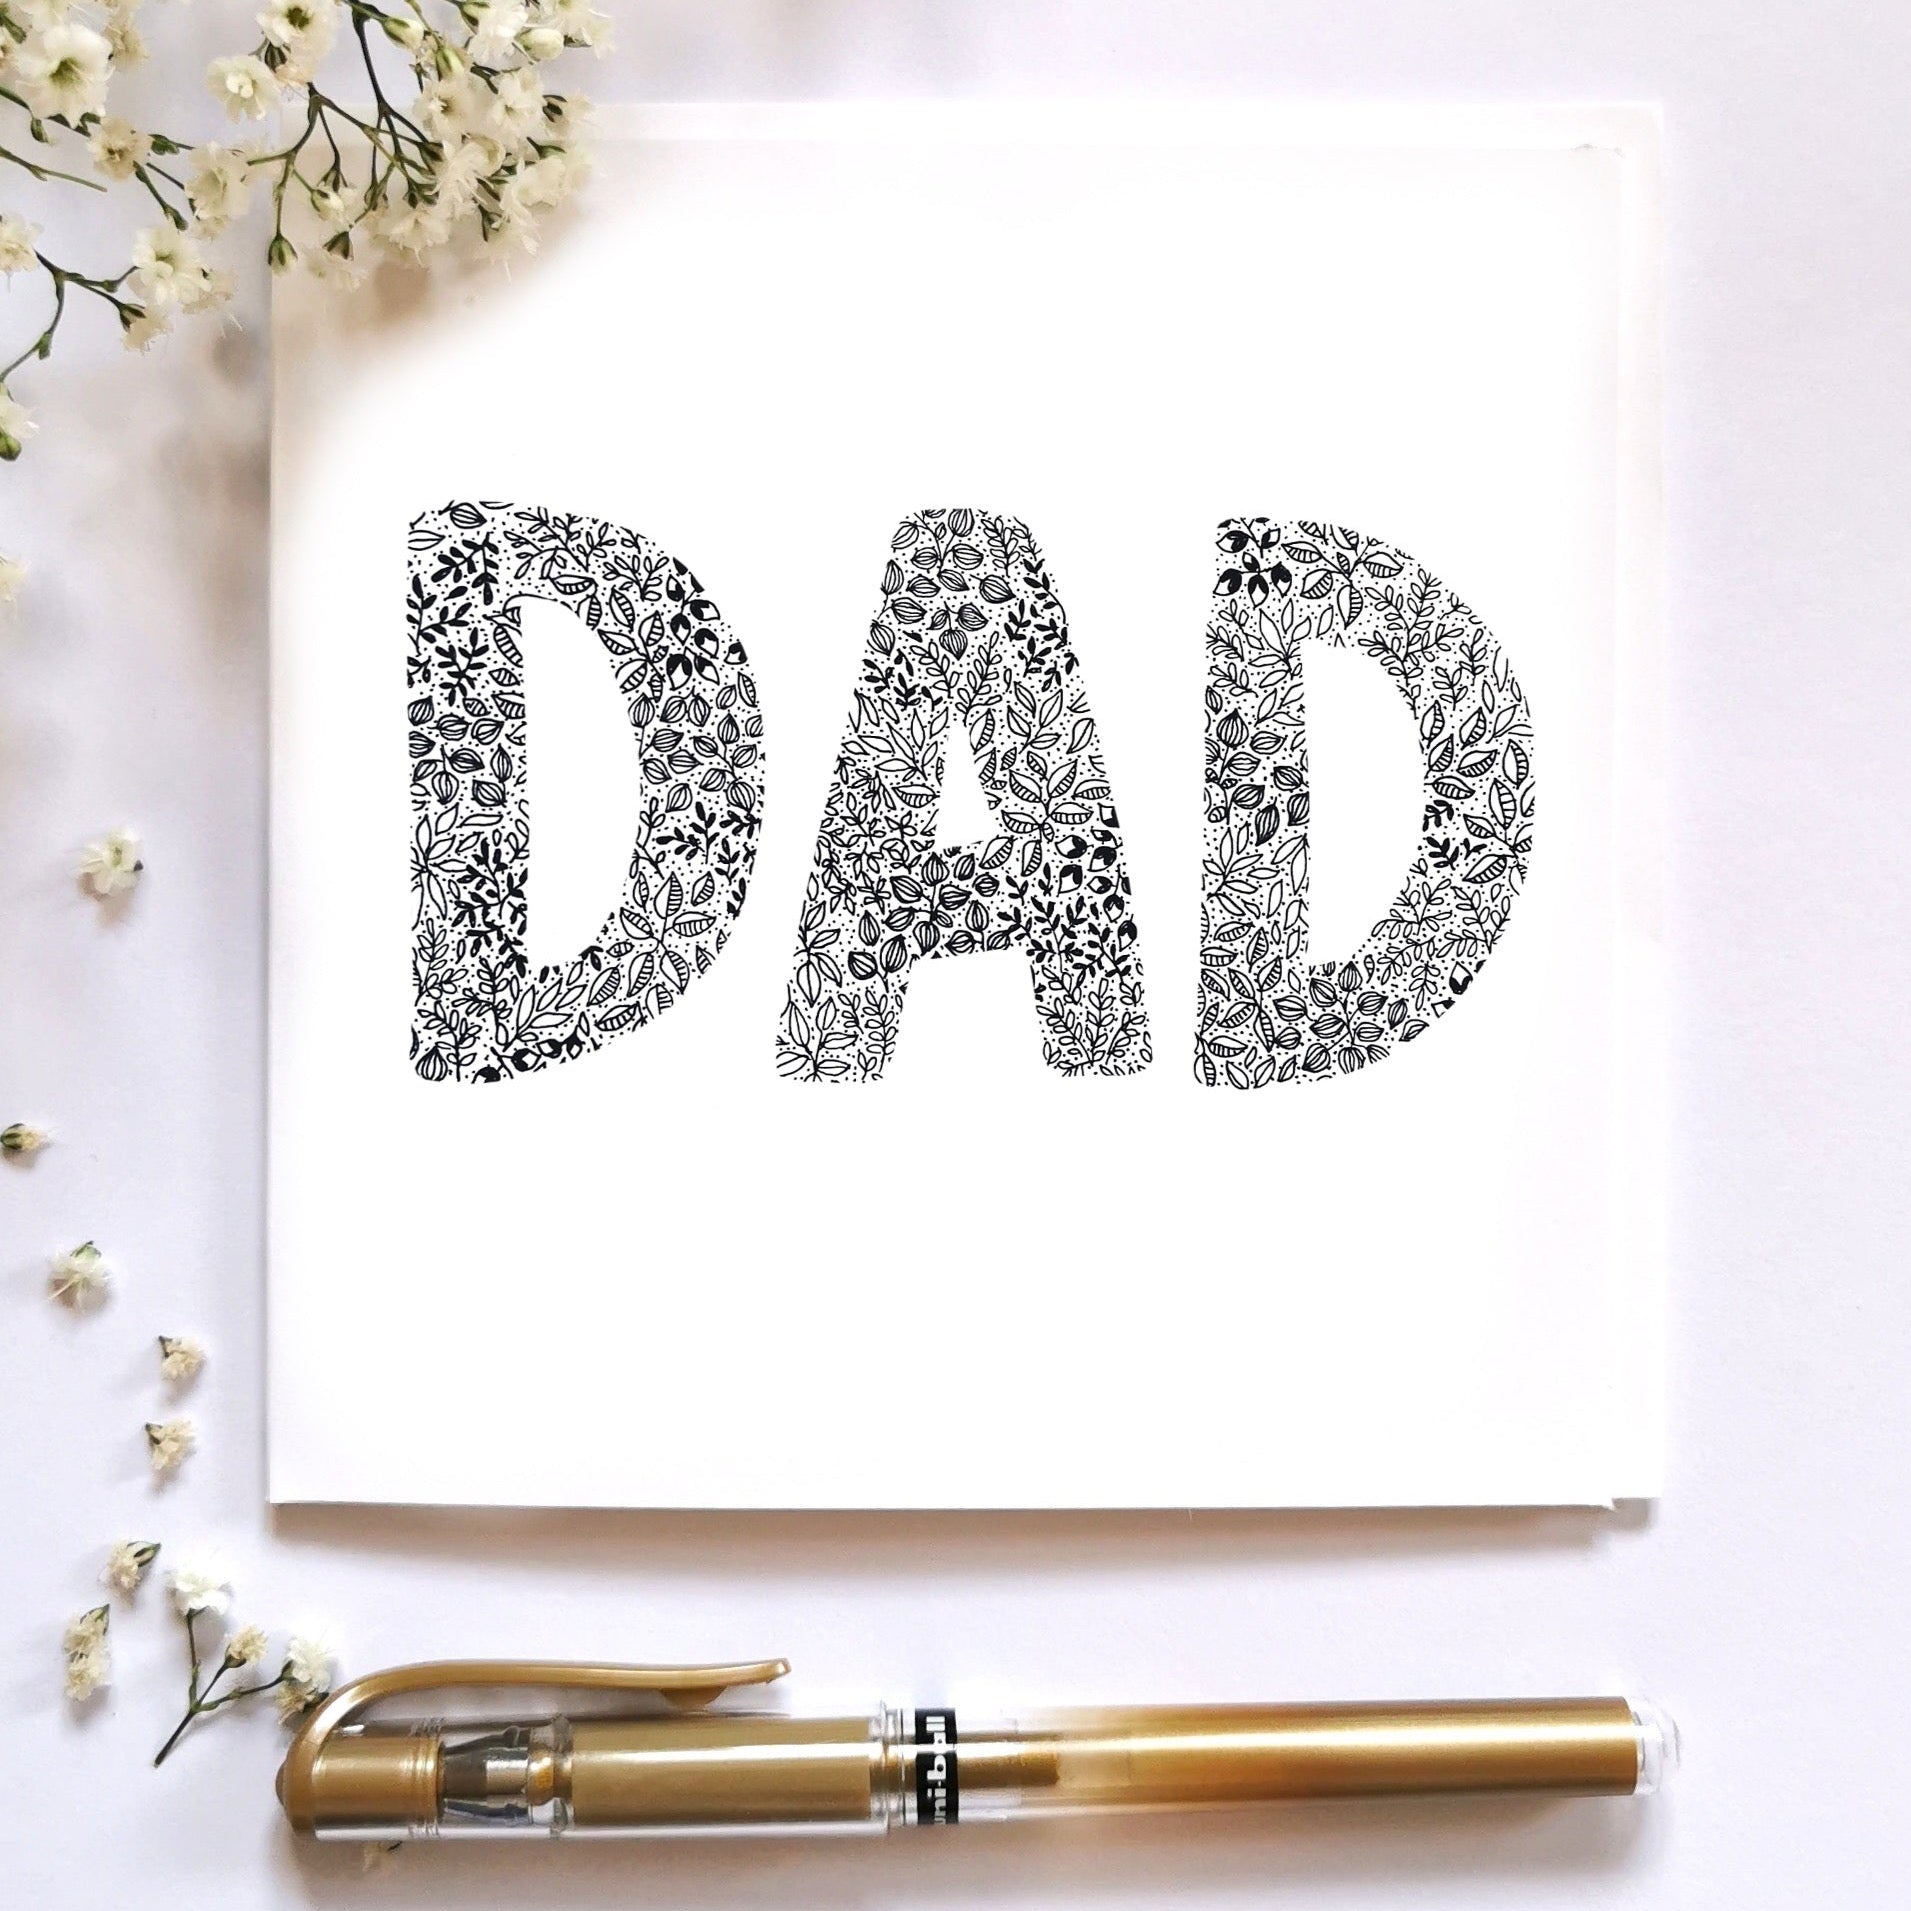 Image shows the word DAD drawn from entirely black and white floral drawings. the word DAD is centred in the middle of the illustration with a gold pen laid at the bottom of the image to show what it would look like dressed up. 